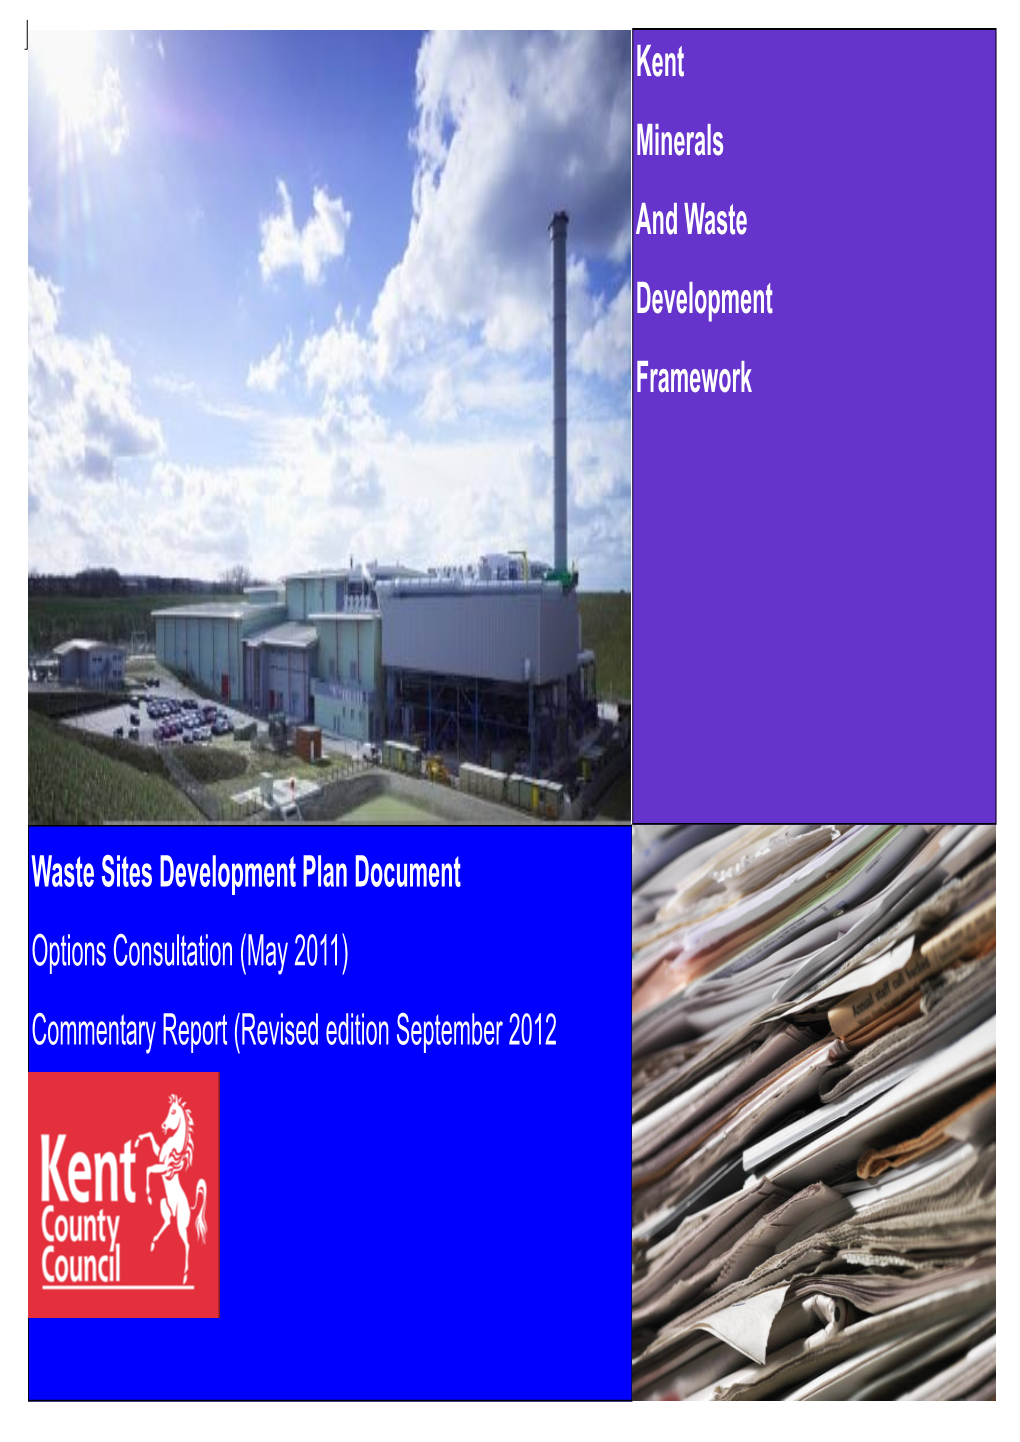 Waste Sites Development Plan Document Options Consultation (May 2011) Commentary Report (Revised Edition September 2012